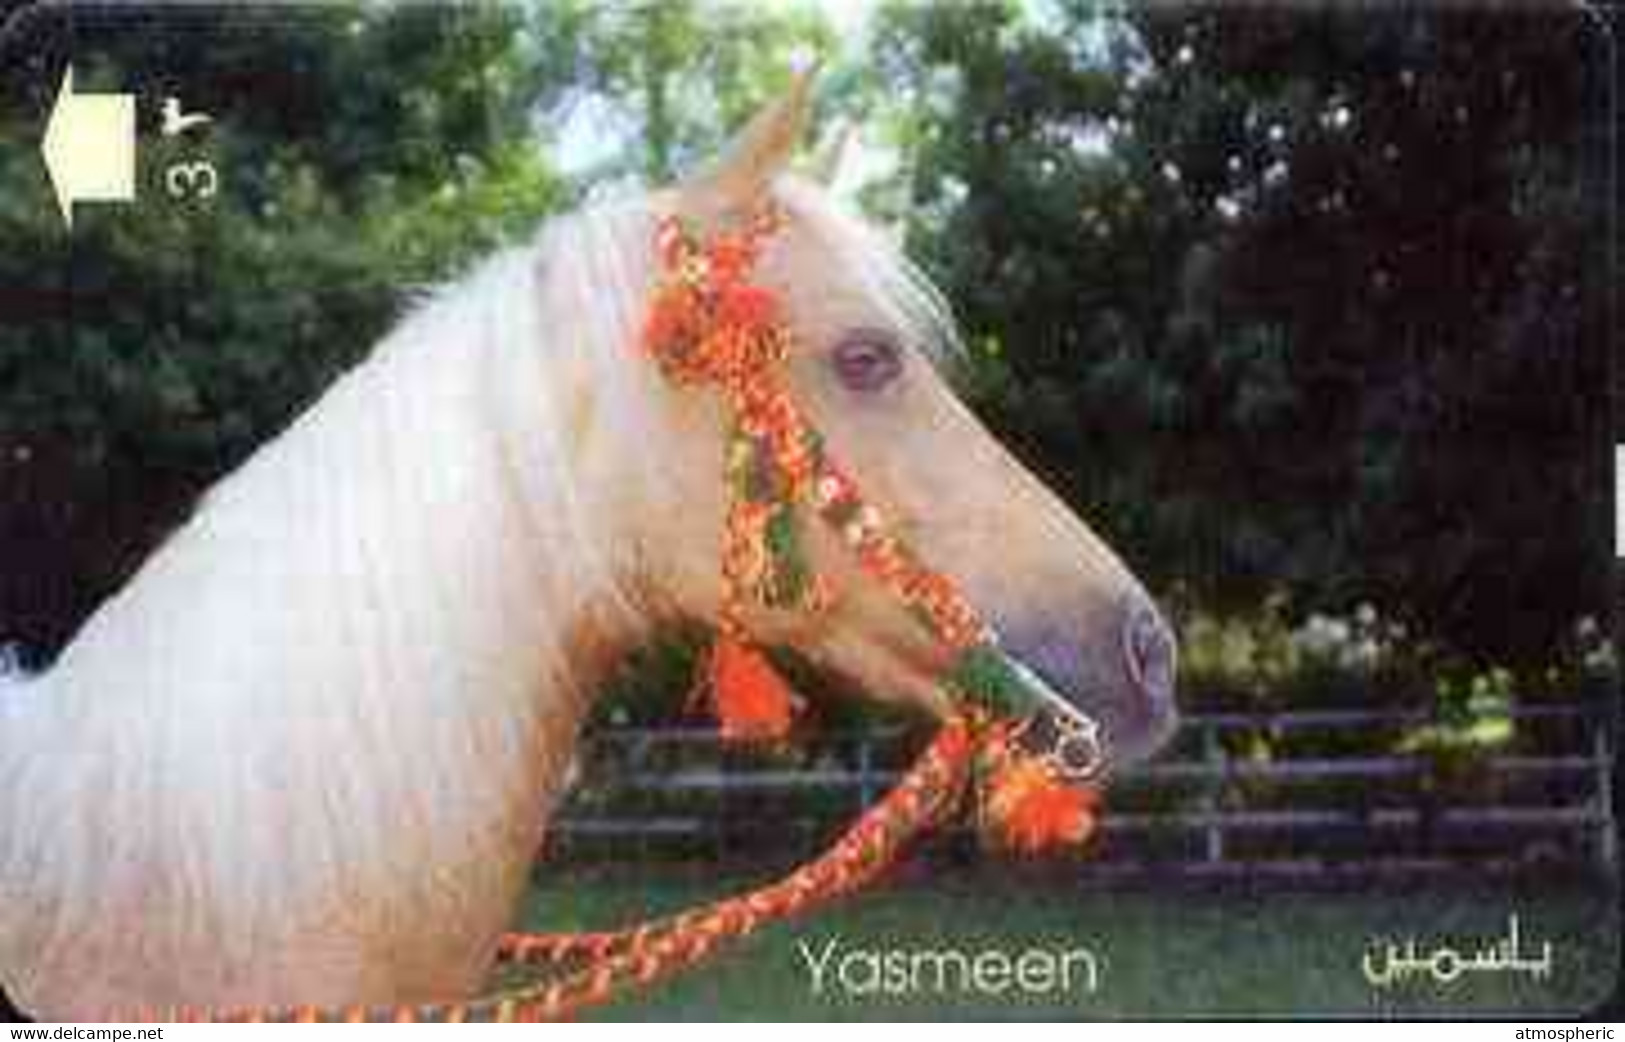 Telephone Card -Oman 3r Phone Card Showing Horse (Yasmeen) - Chevaux